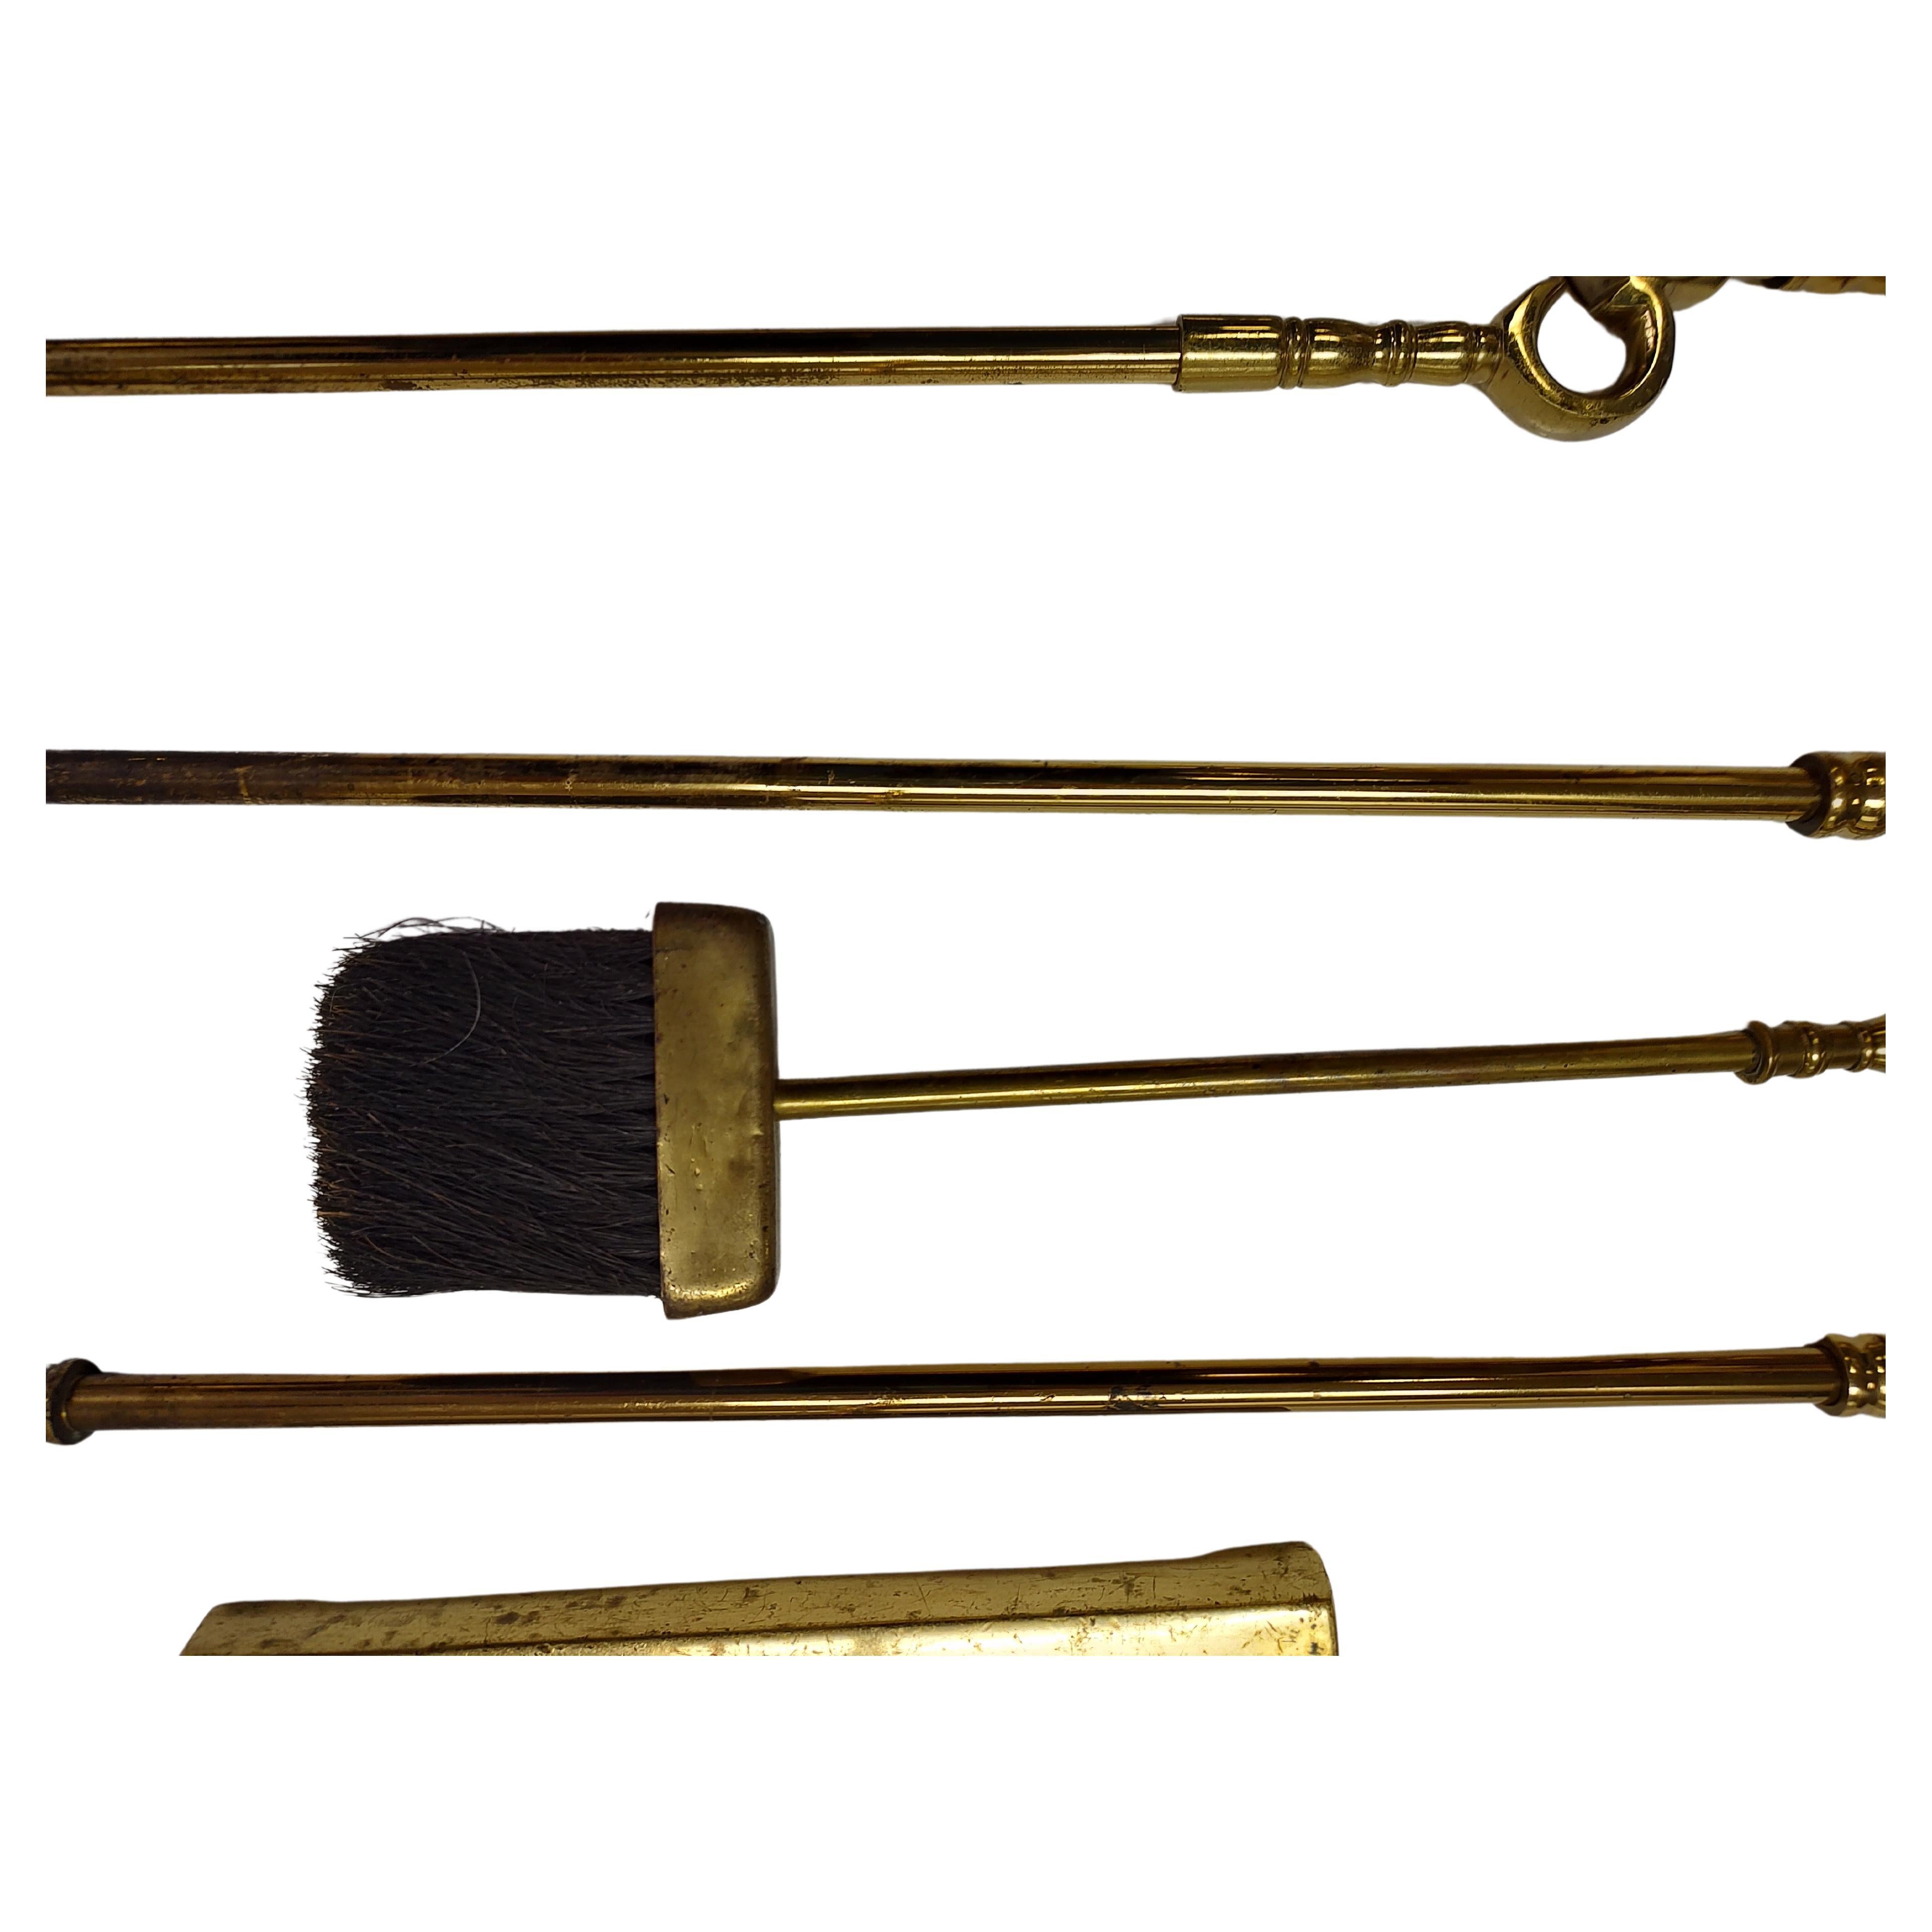 High quality set of fireplace tools with Holder. Brush, shovel, poker and log clamp all in solid brass. In excellent vintage condition with minimal wear. This item can be parcel posted.